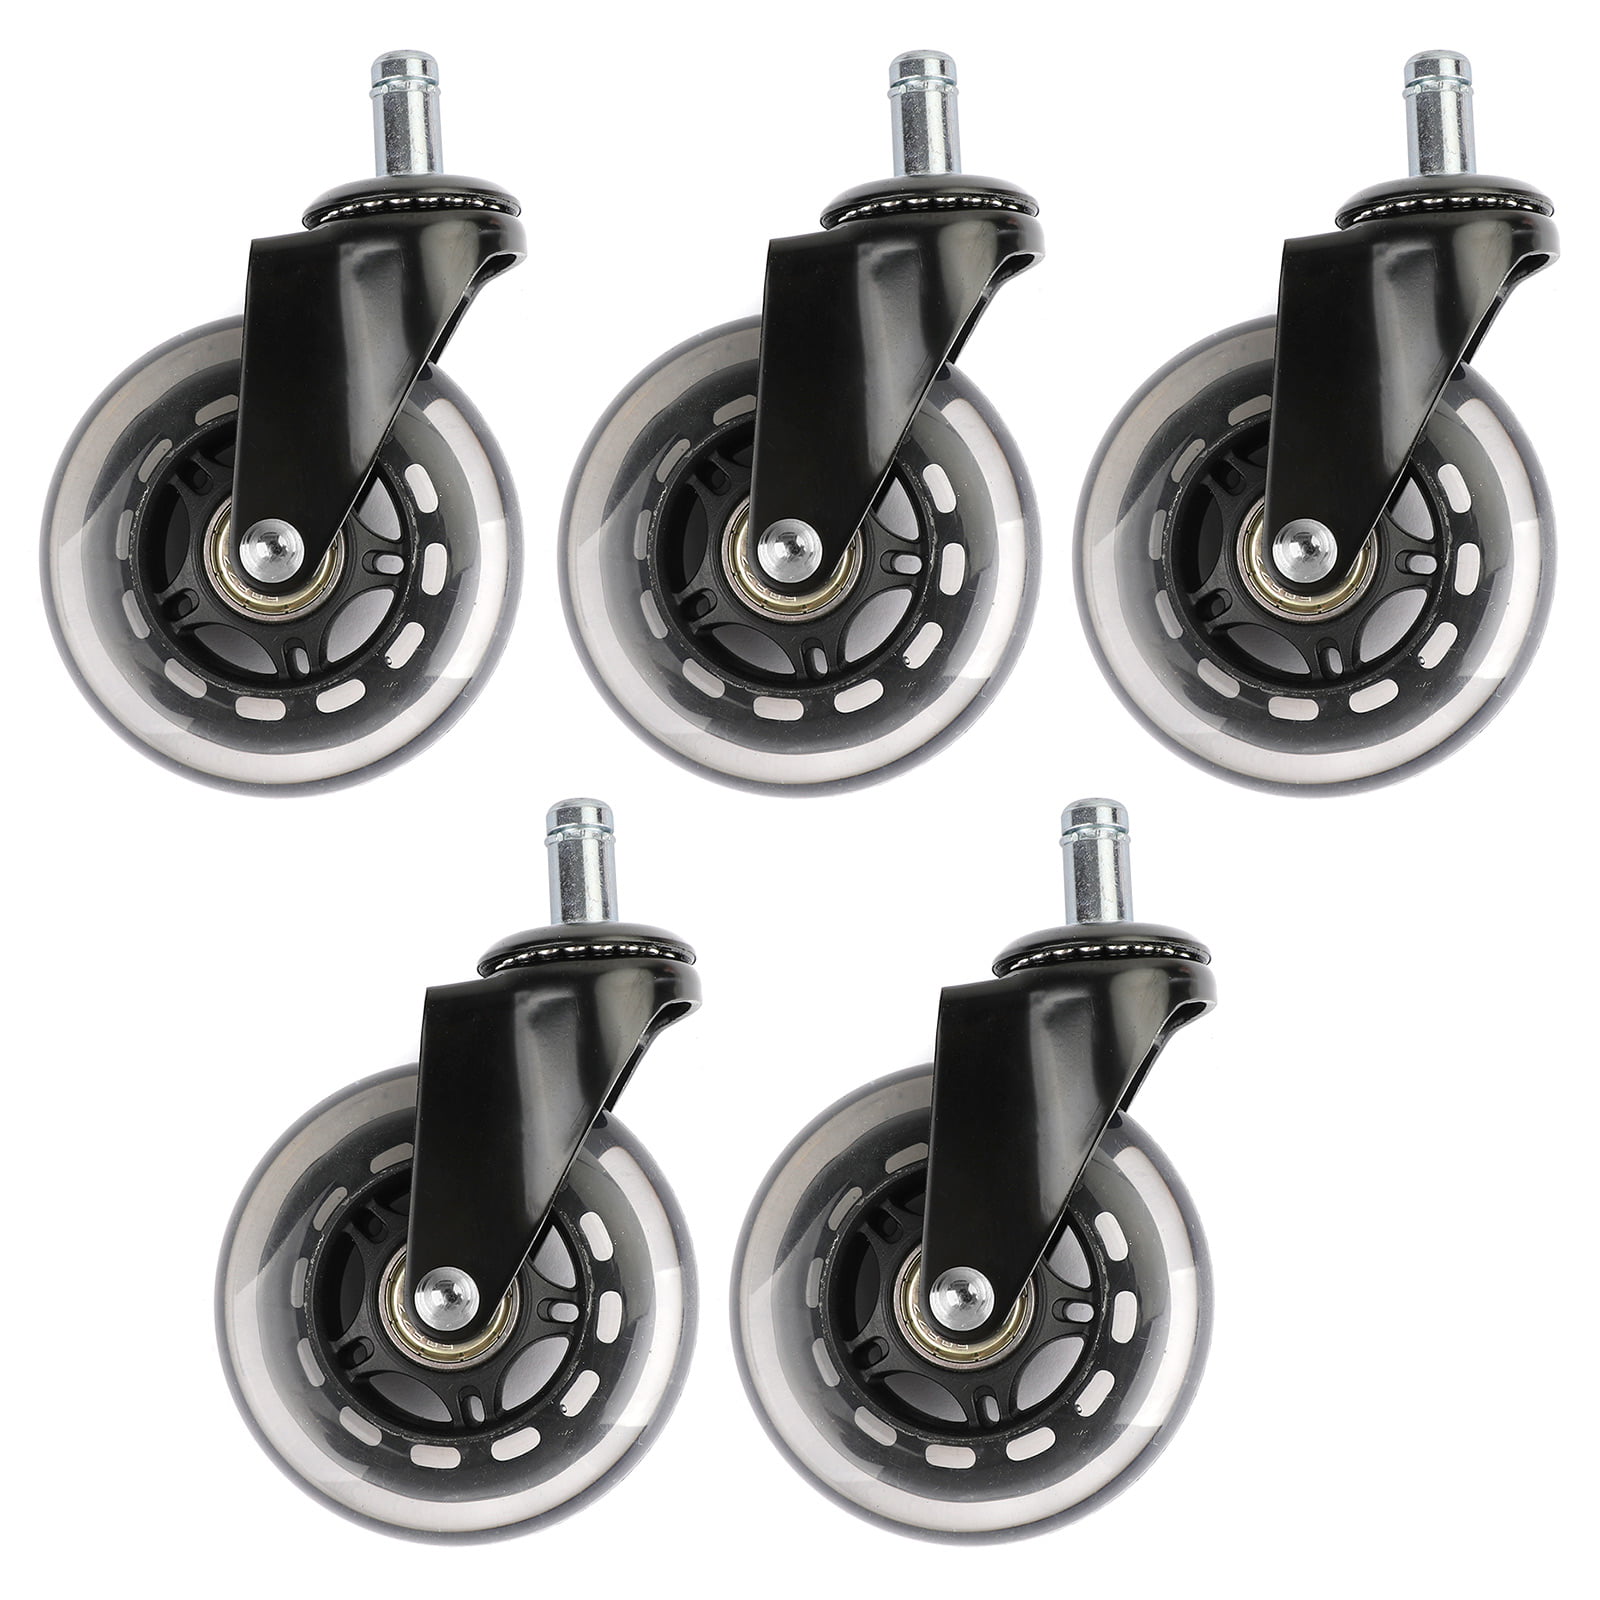 Set of 5 Office Chair Caster 3-INCH Rubber Swivel Wheels Replacement Heavy Duty 